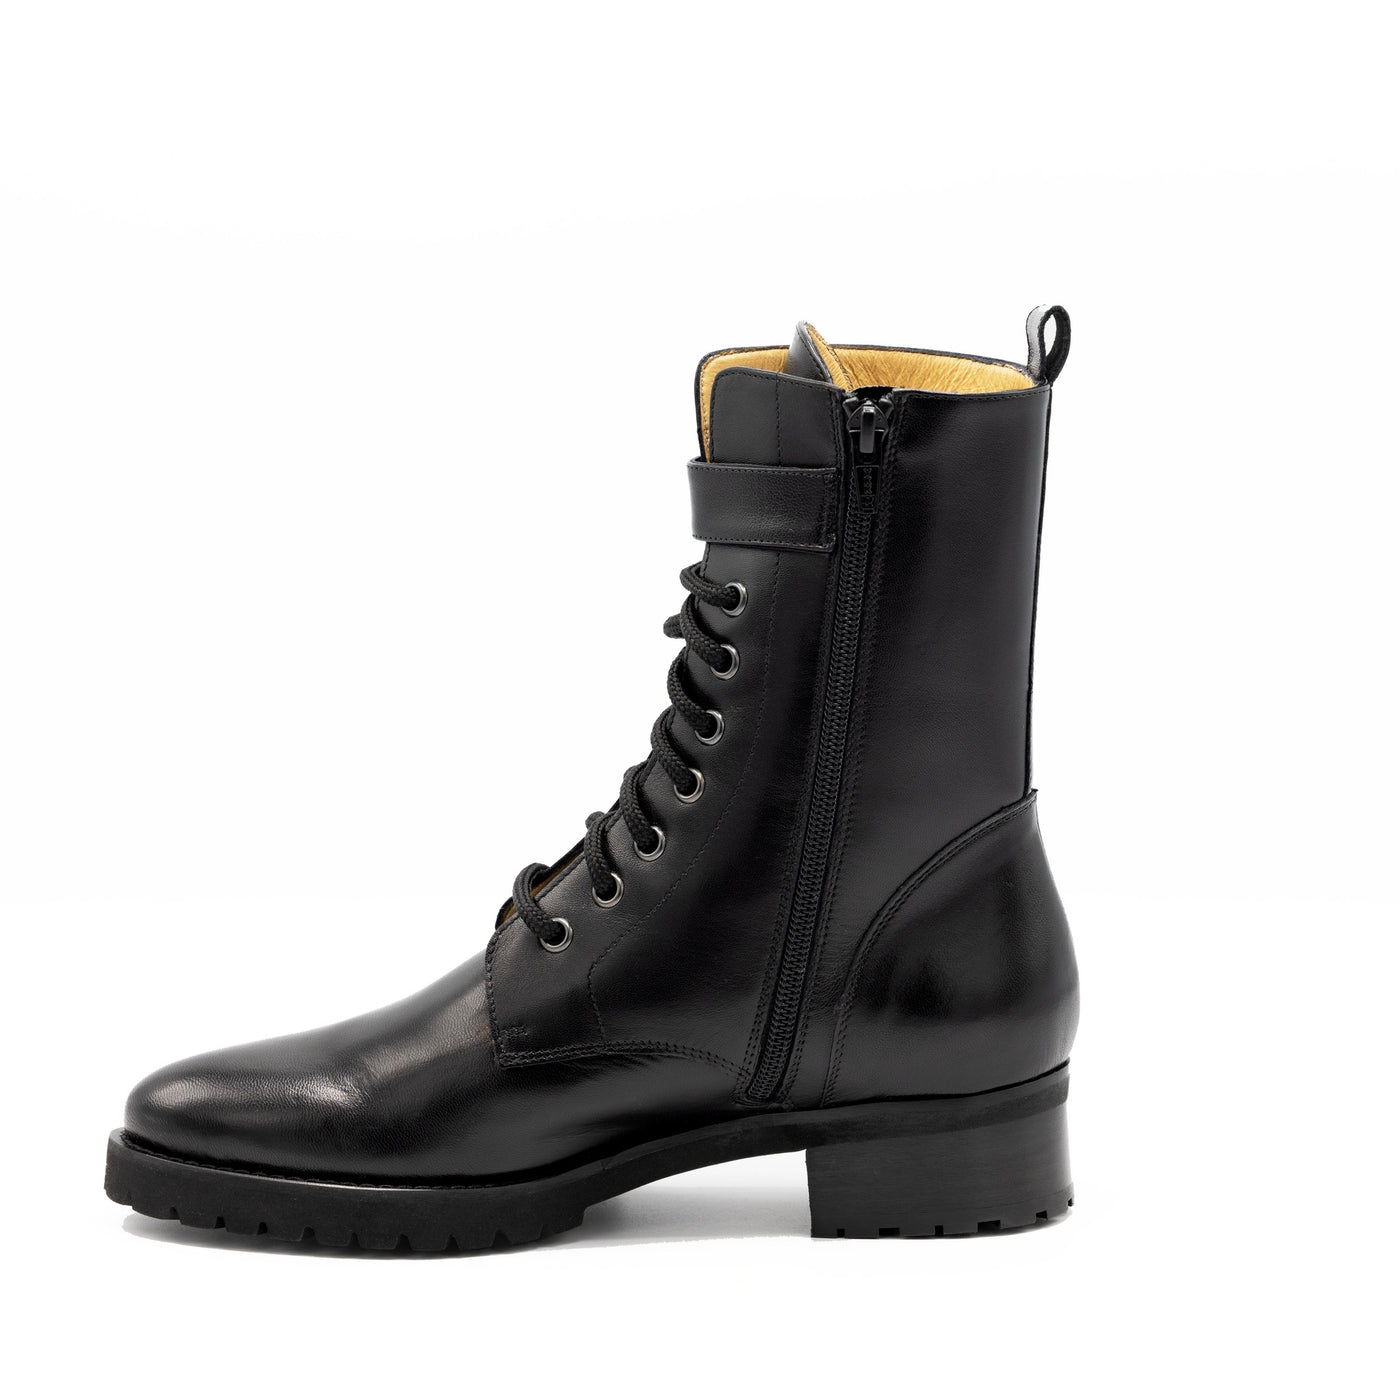 Women's black leather combat boots with zipper